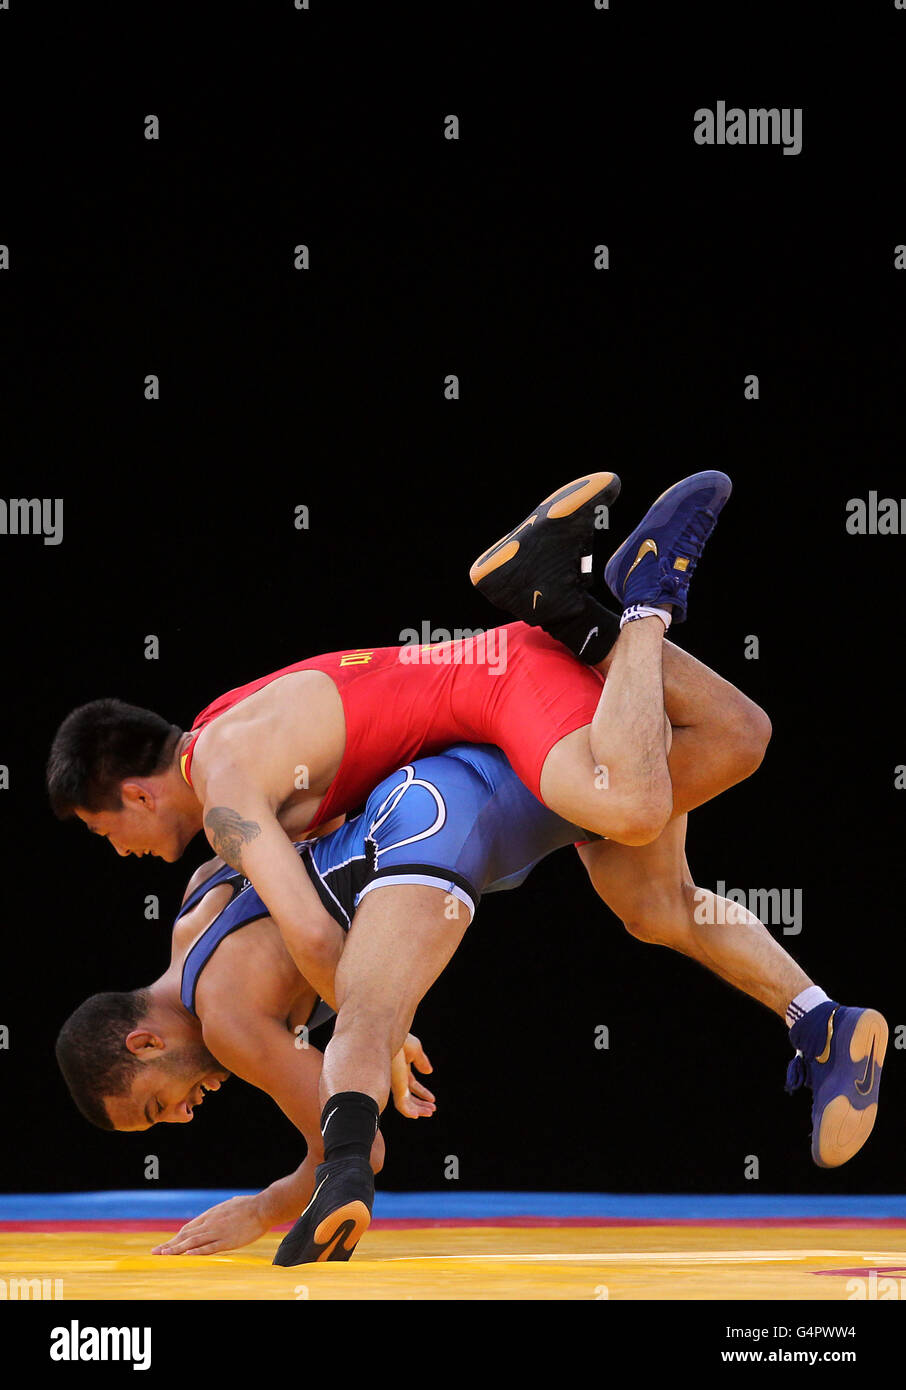 The USA's Angel Escobedo (bottom) in action against China's Qi Mude during the London Olympic Games 2012 Test Event at the Excel Arena, London. Stock Photo